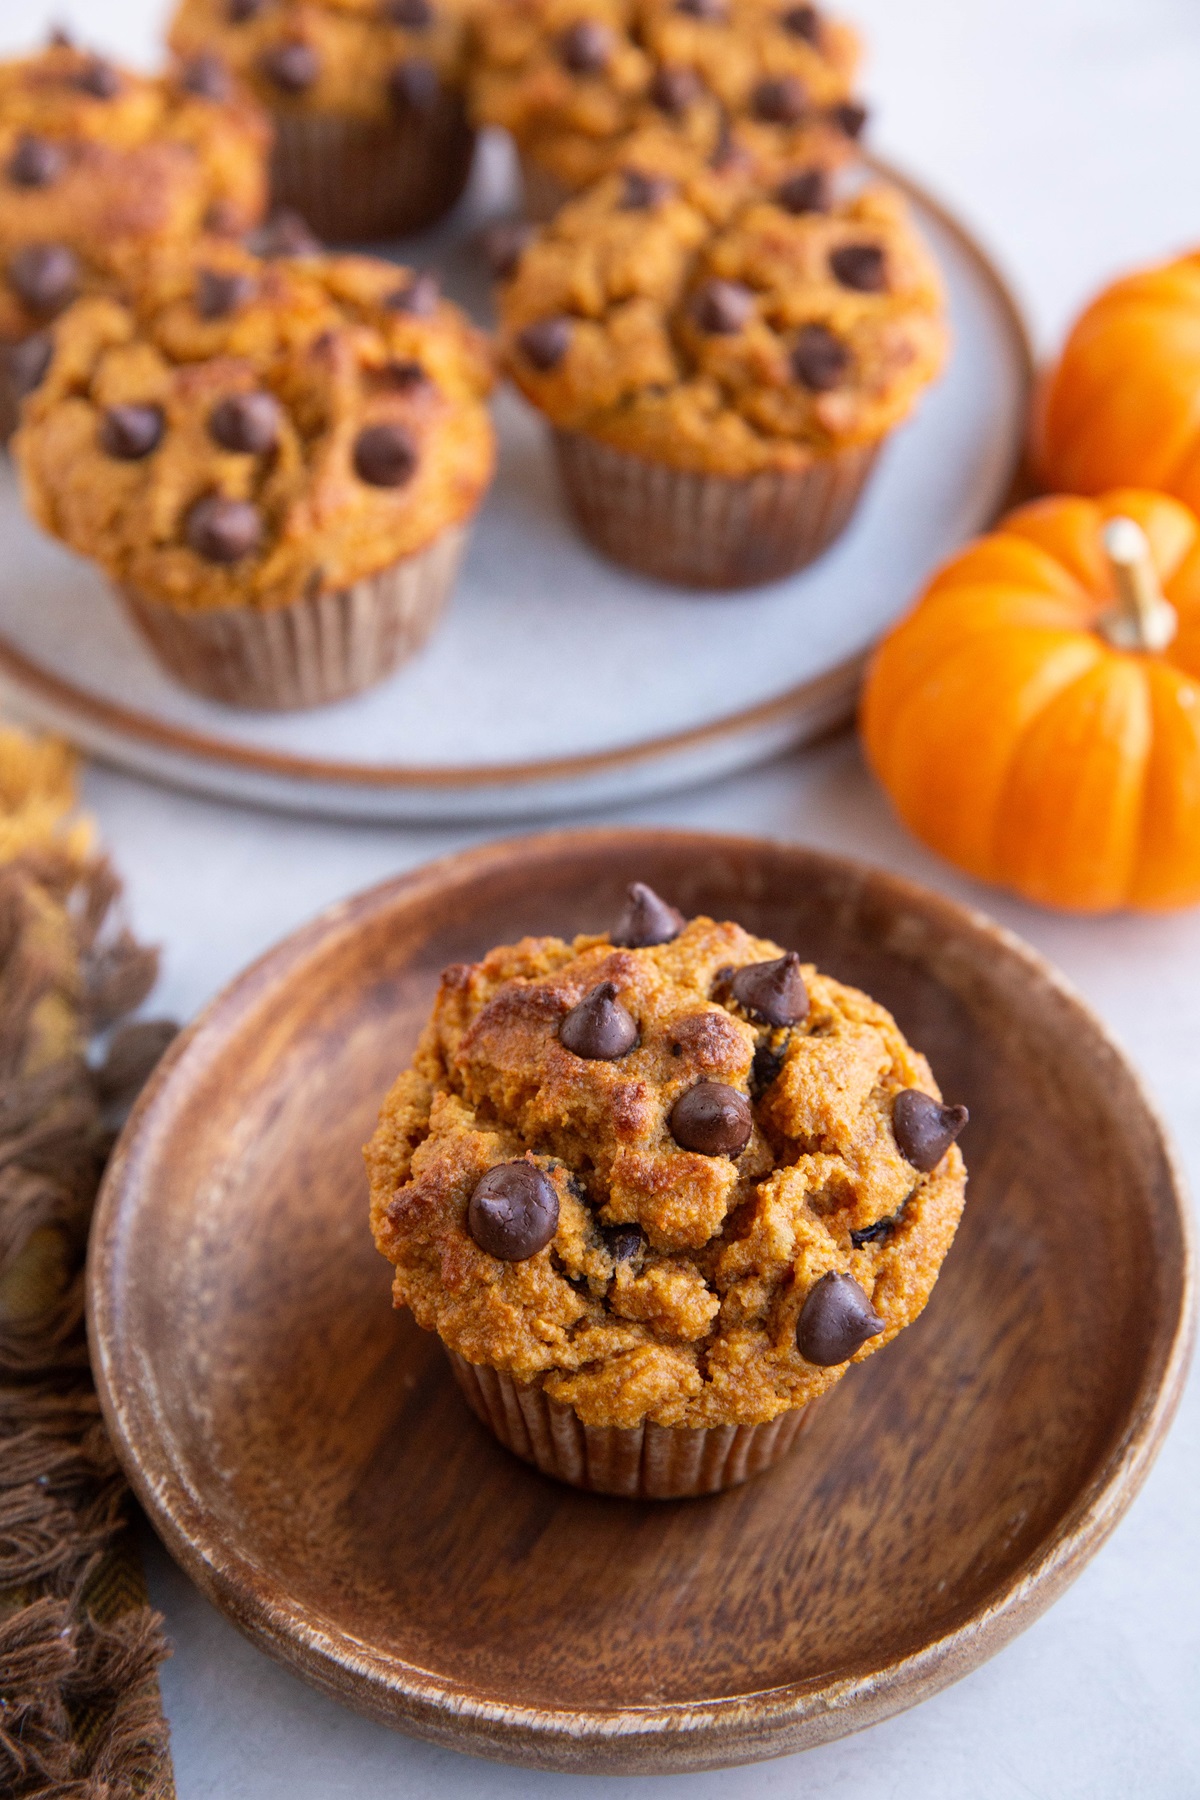 Pumpkin muffin on a wooden plate with a plate of more muffins in the background.